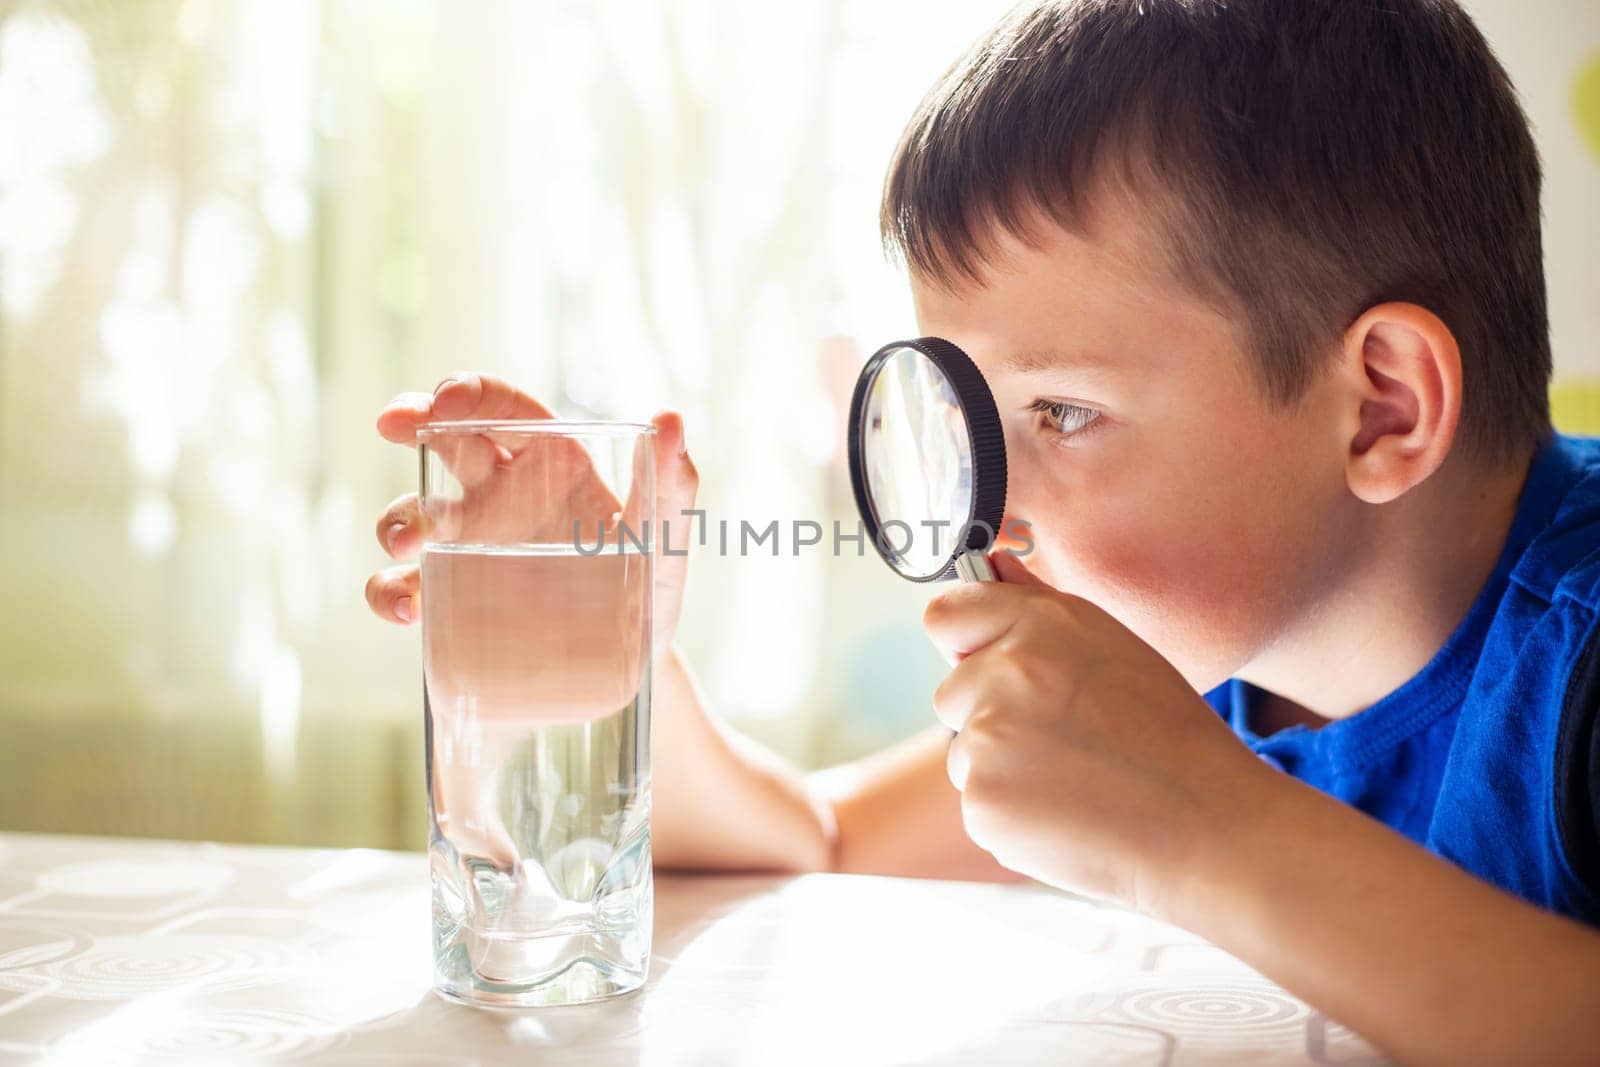 The child boy looking at water in a glass through magnifying glass by andreyz